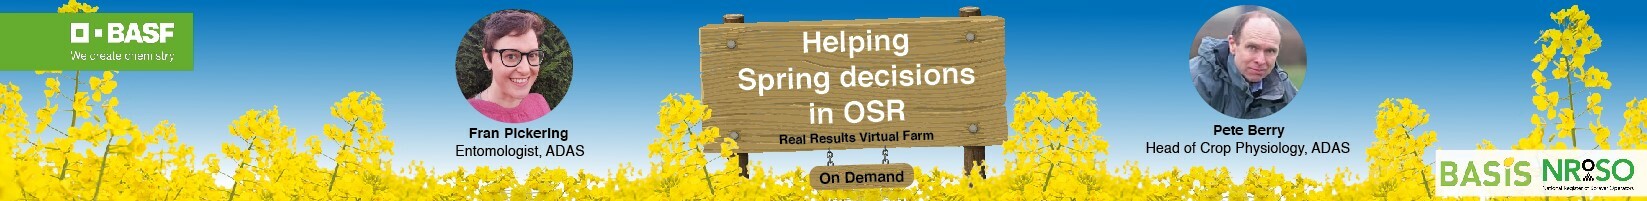 Help spring decisions in OSR